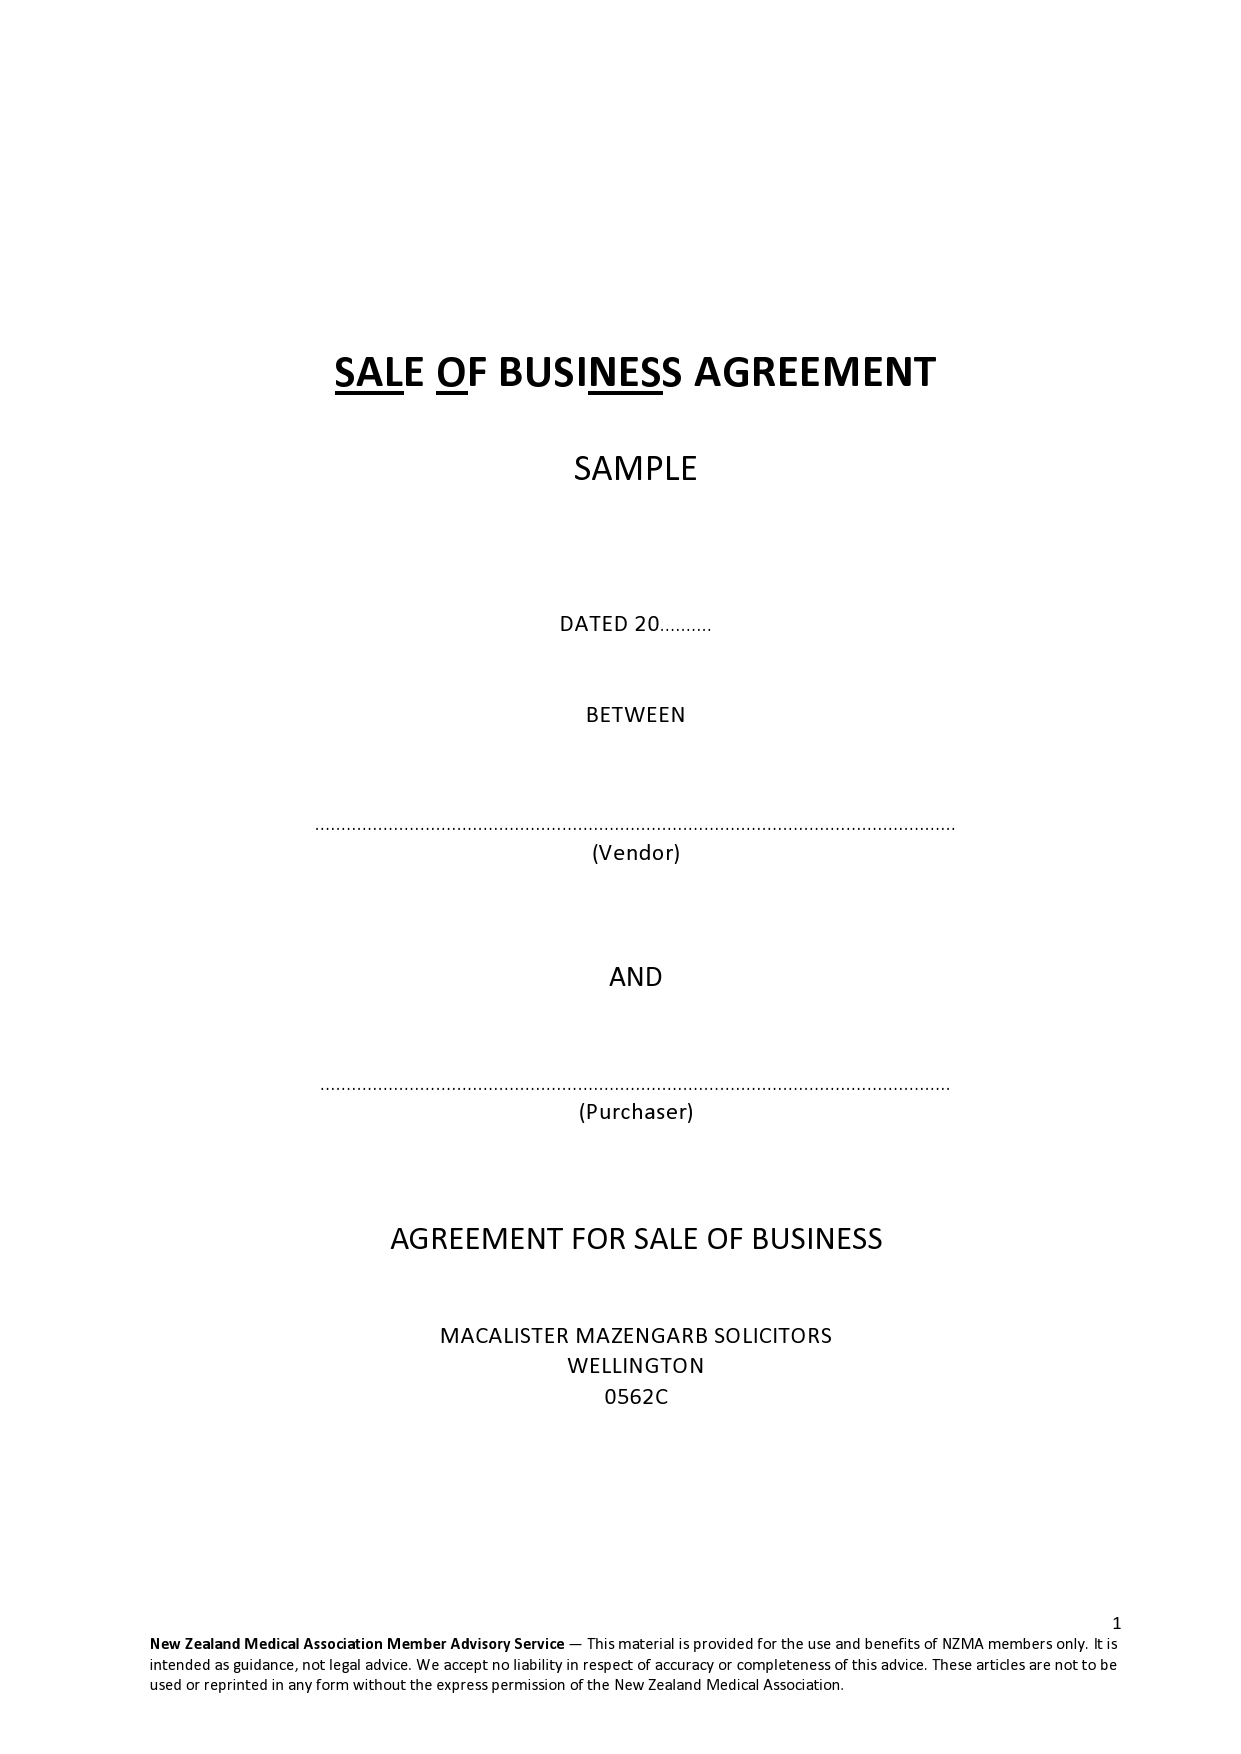 Free business purchase agreement 06